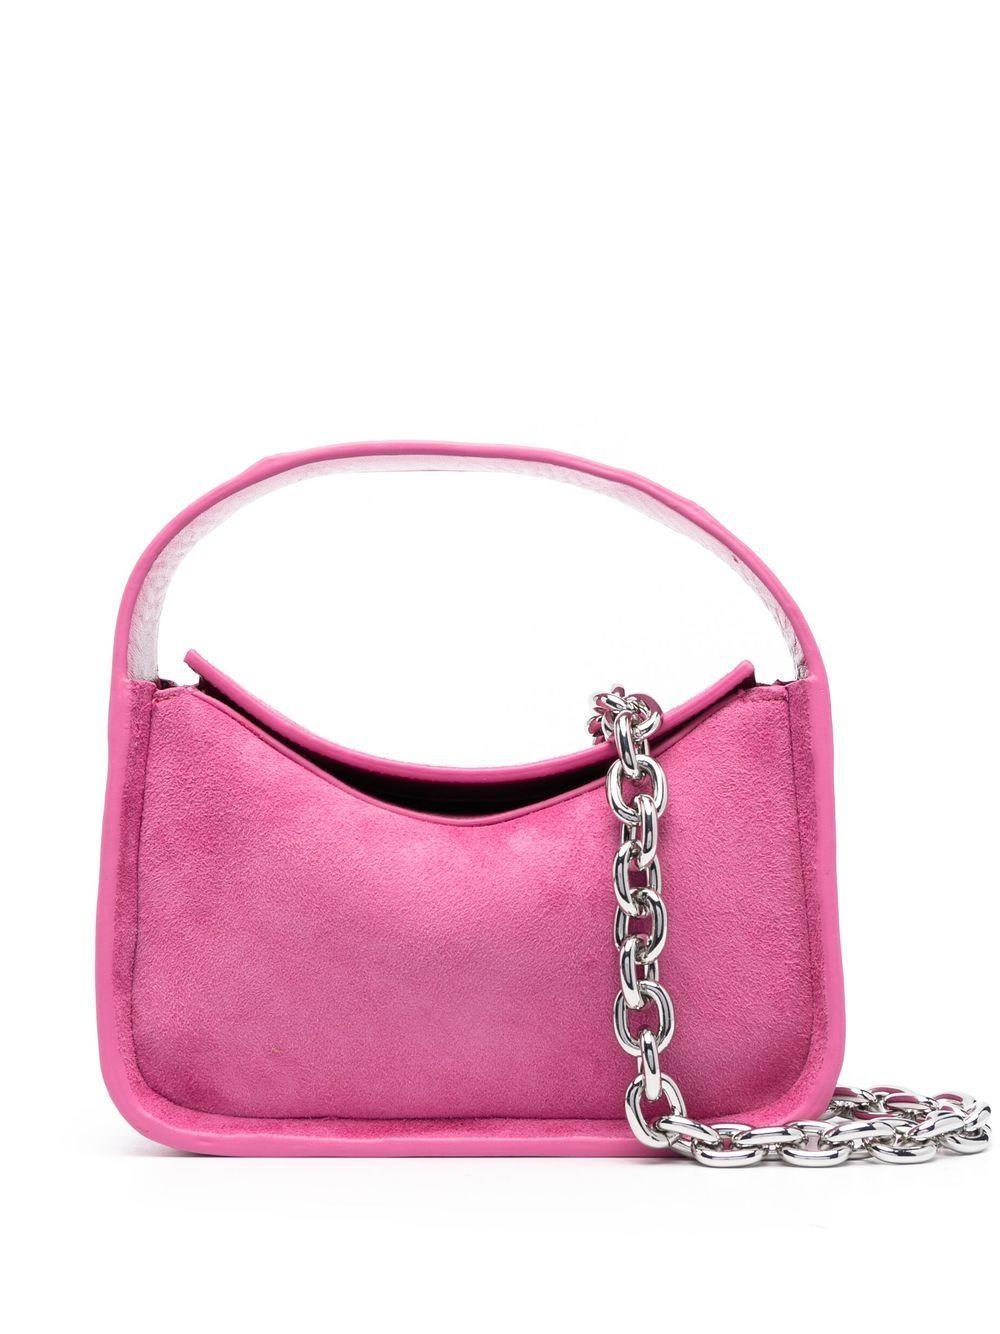 Stand Studio Minnie Leather Tote Bag in Pink | Lyst